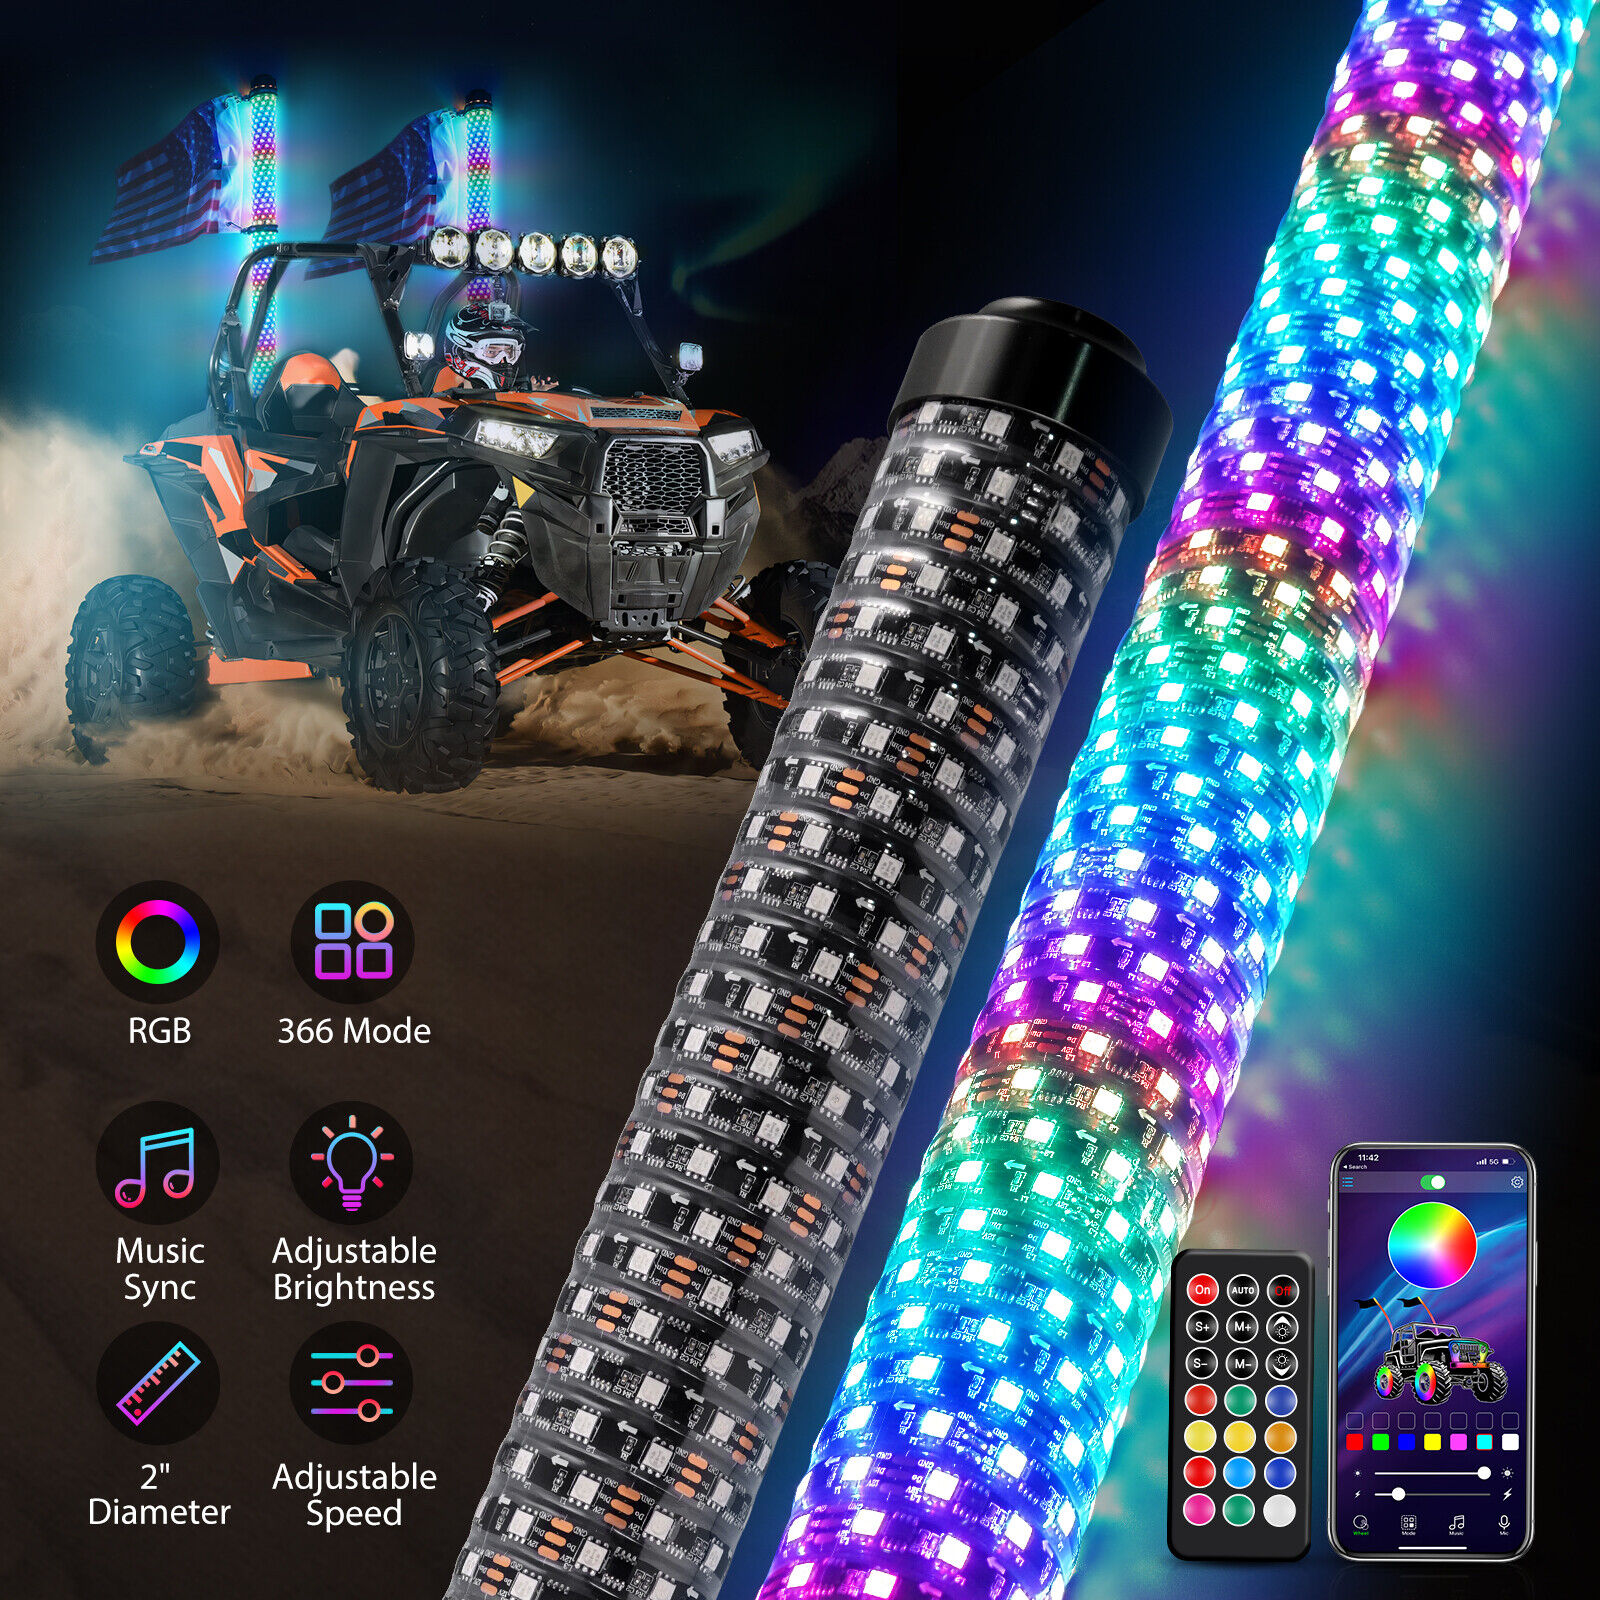 2x 3FT Fat LED Whip Light APP Remote Control RGB Spiral Chasing Antenas Lighting